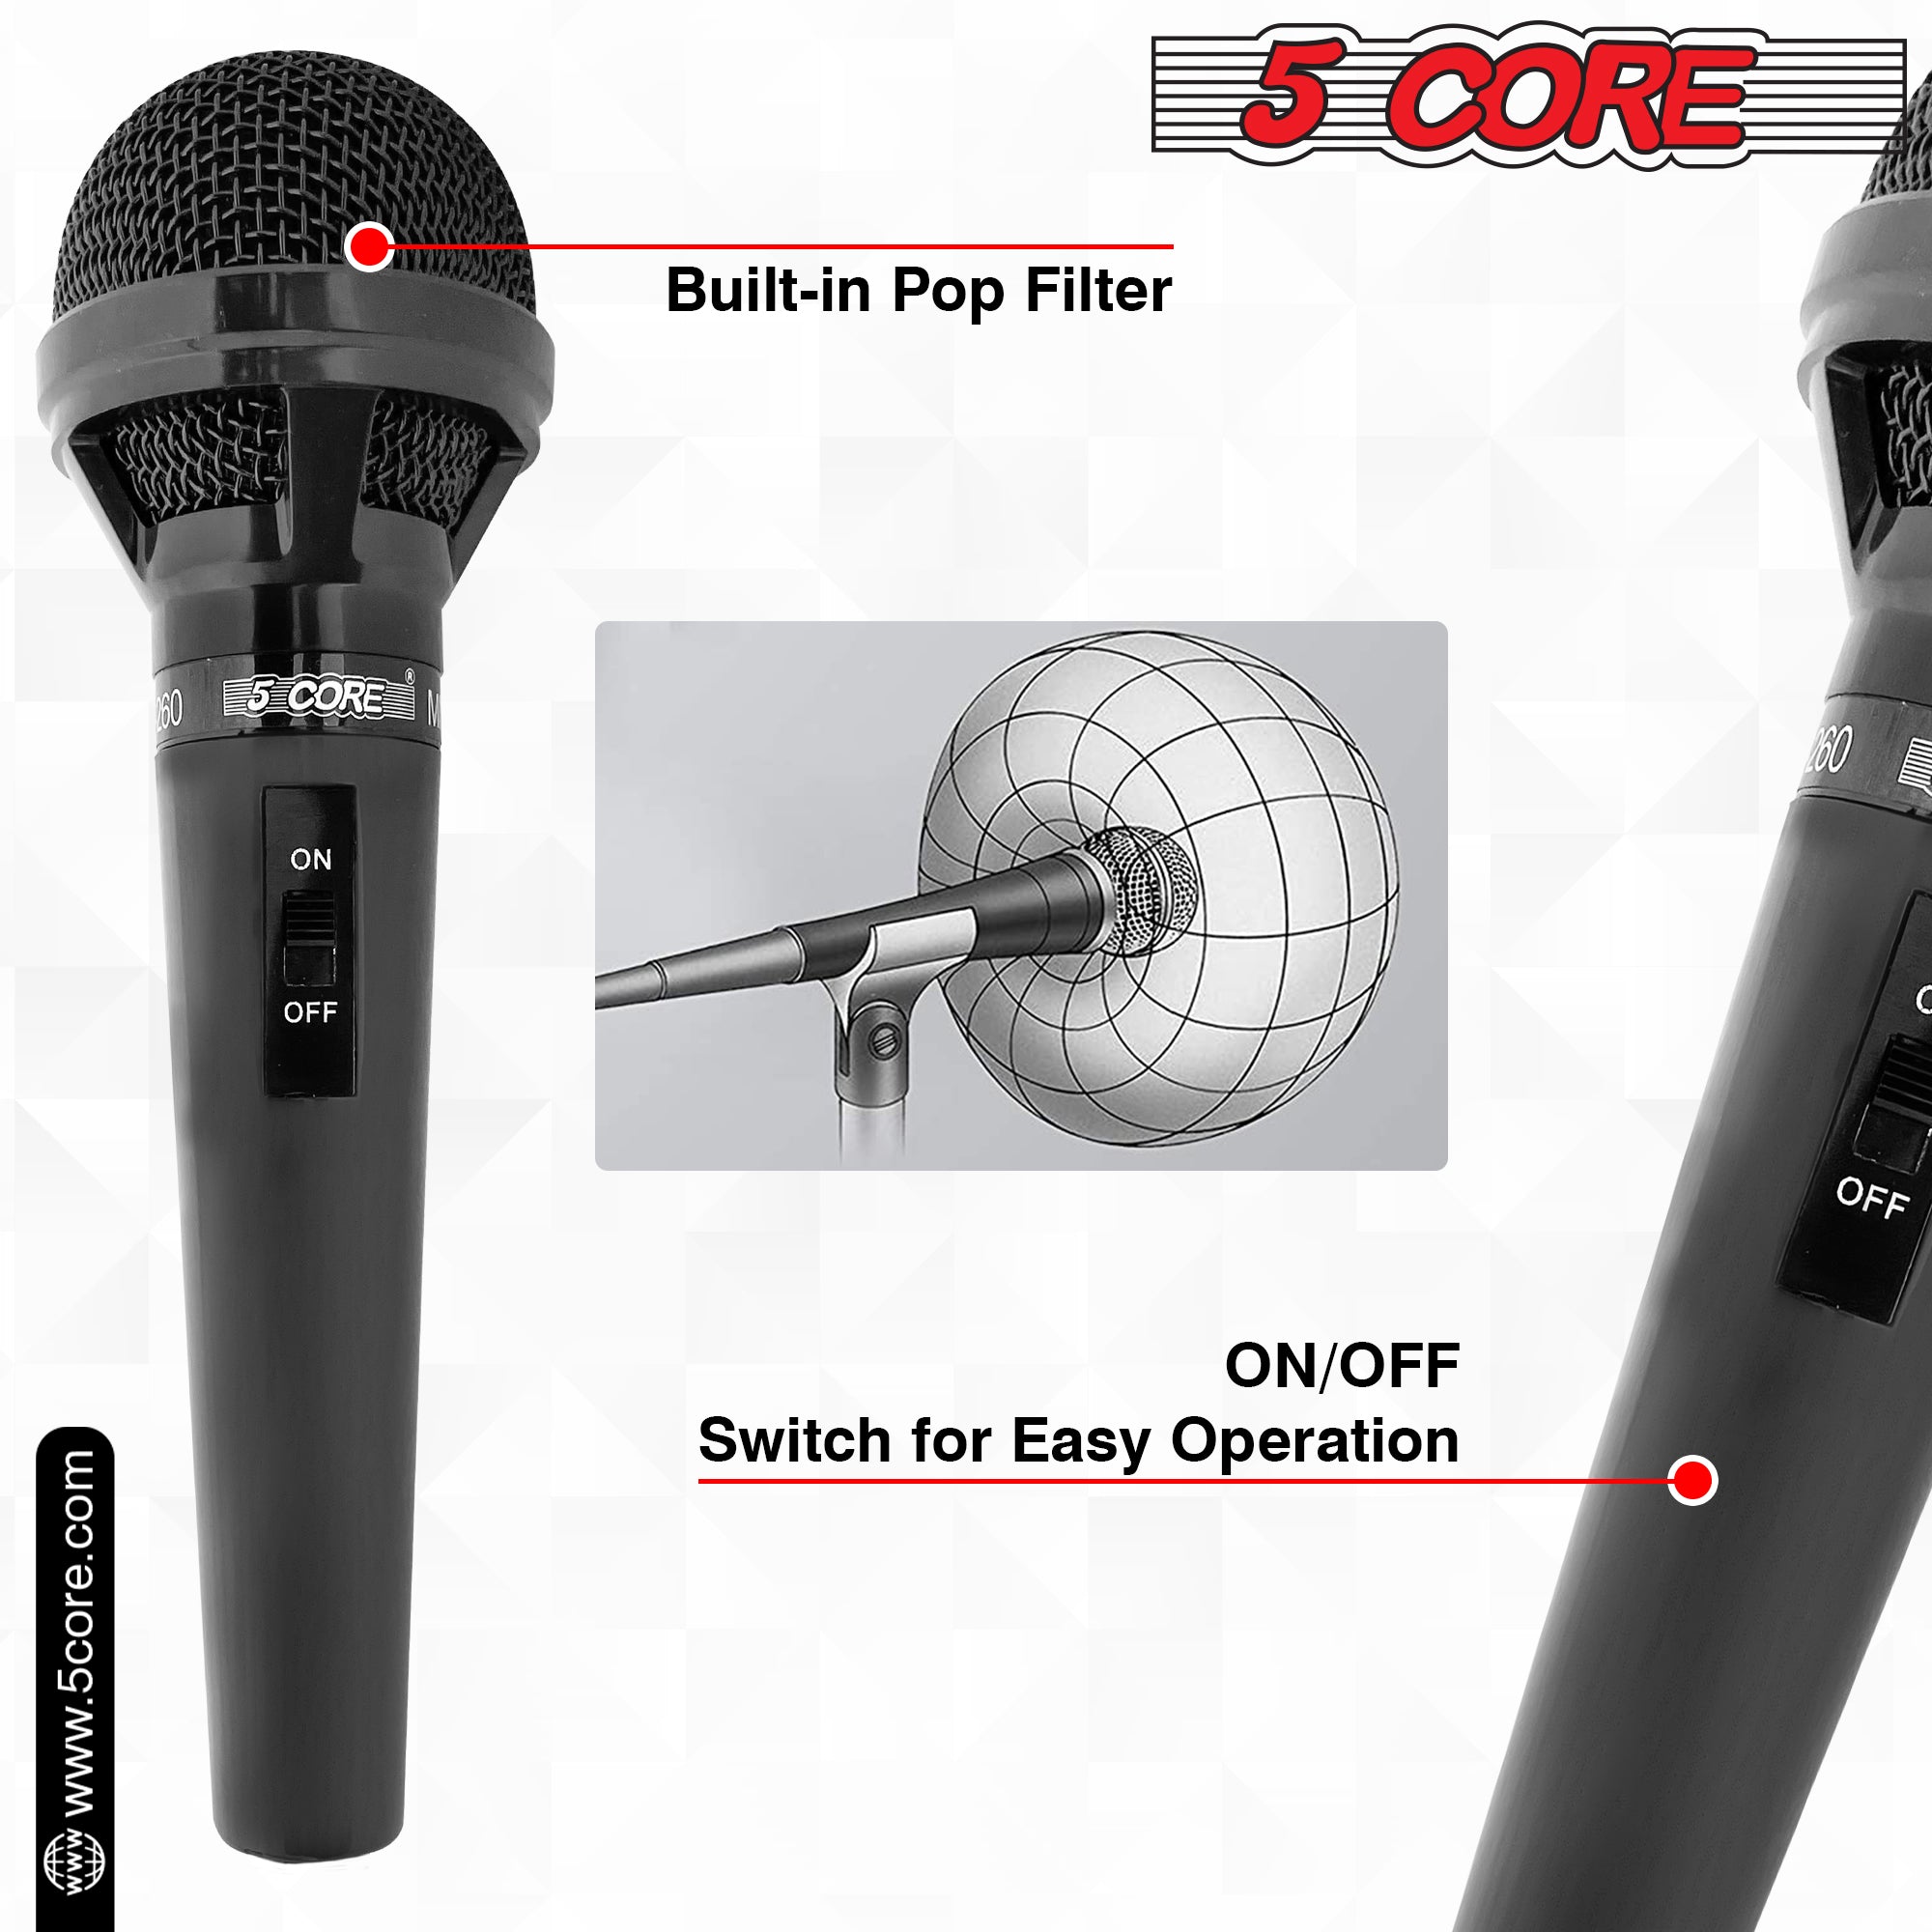 Unidirectional Focus: Ideal for Singing and Karaoke Performances